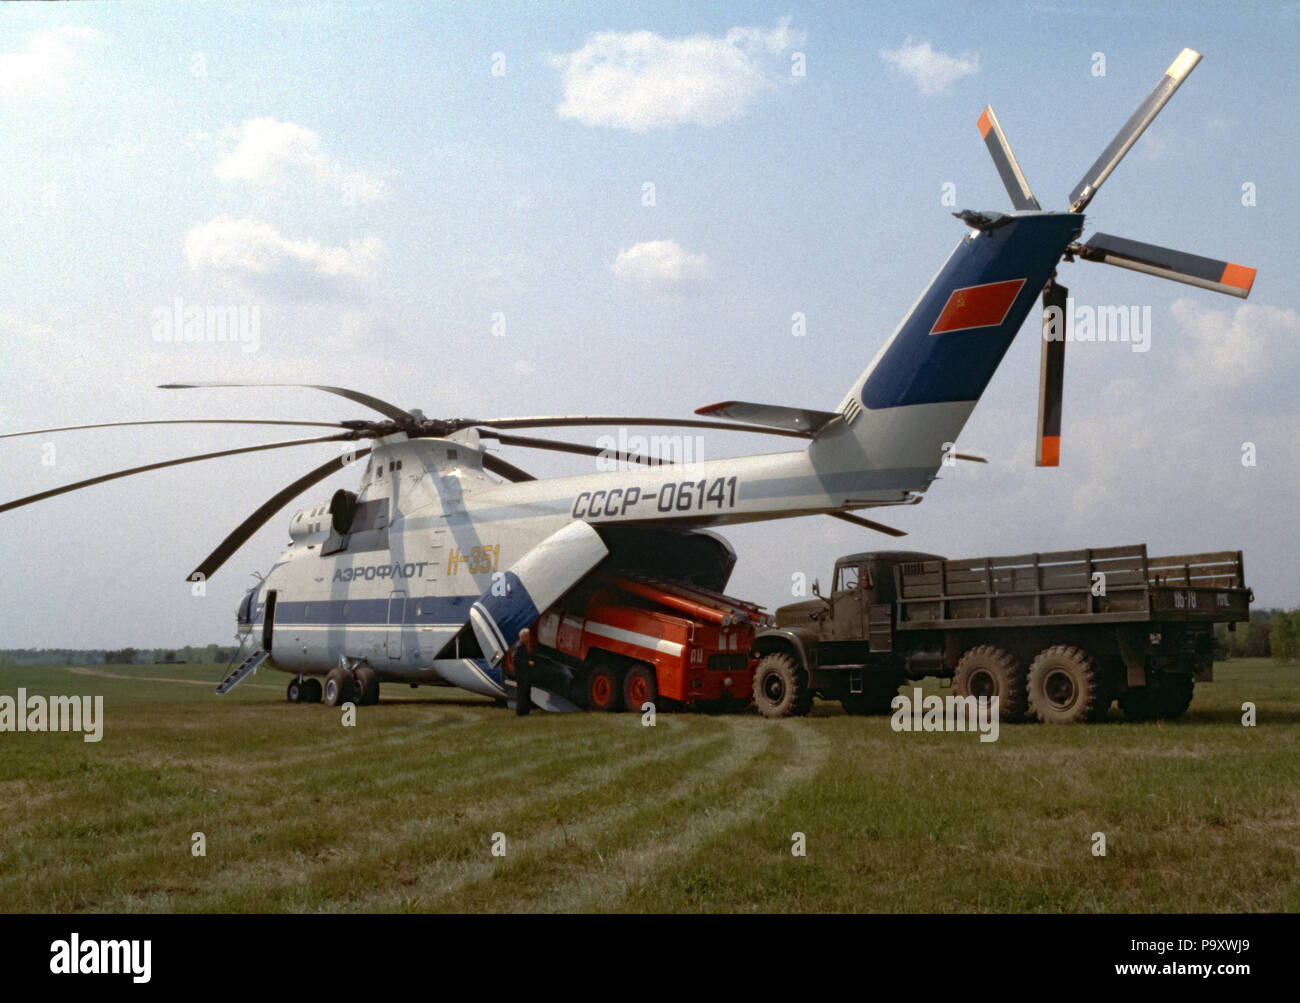 the-second-flying-prototype-of-the-worlds-biggest-mil-mi-26-serial-transport-helicopter-demonstrates-its-cargo-loading-possibilities-at-lyubertsy-tes-P9XWJ9.jpg